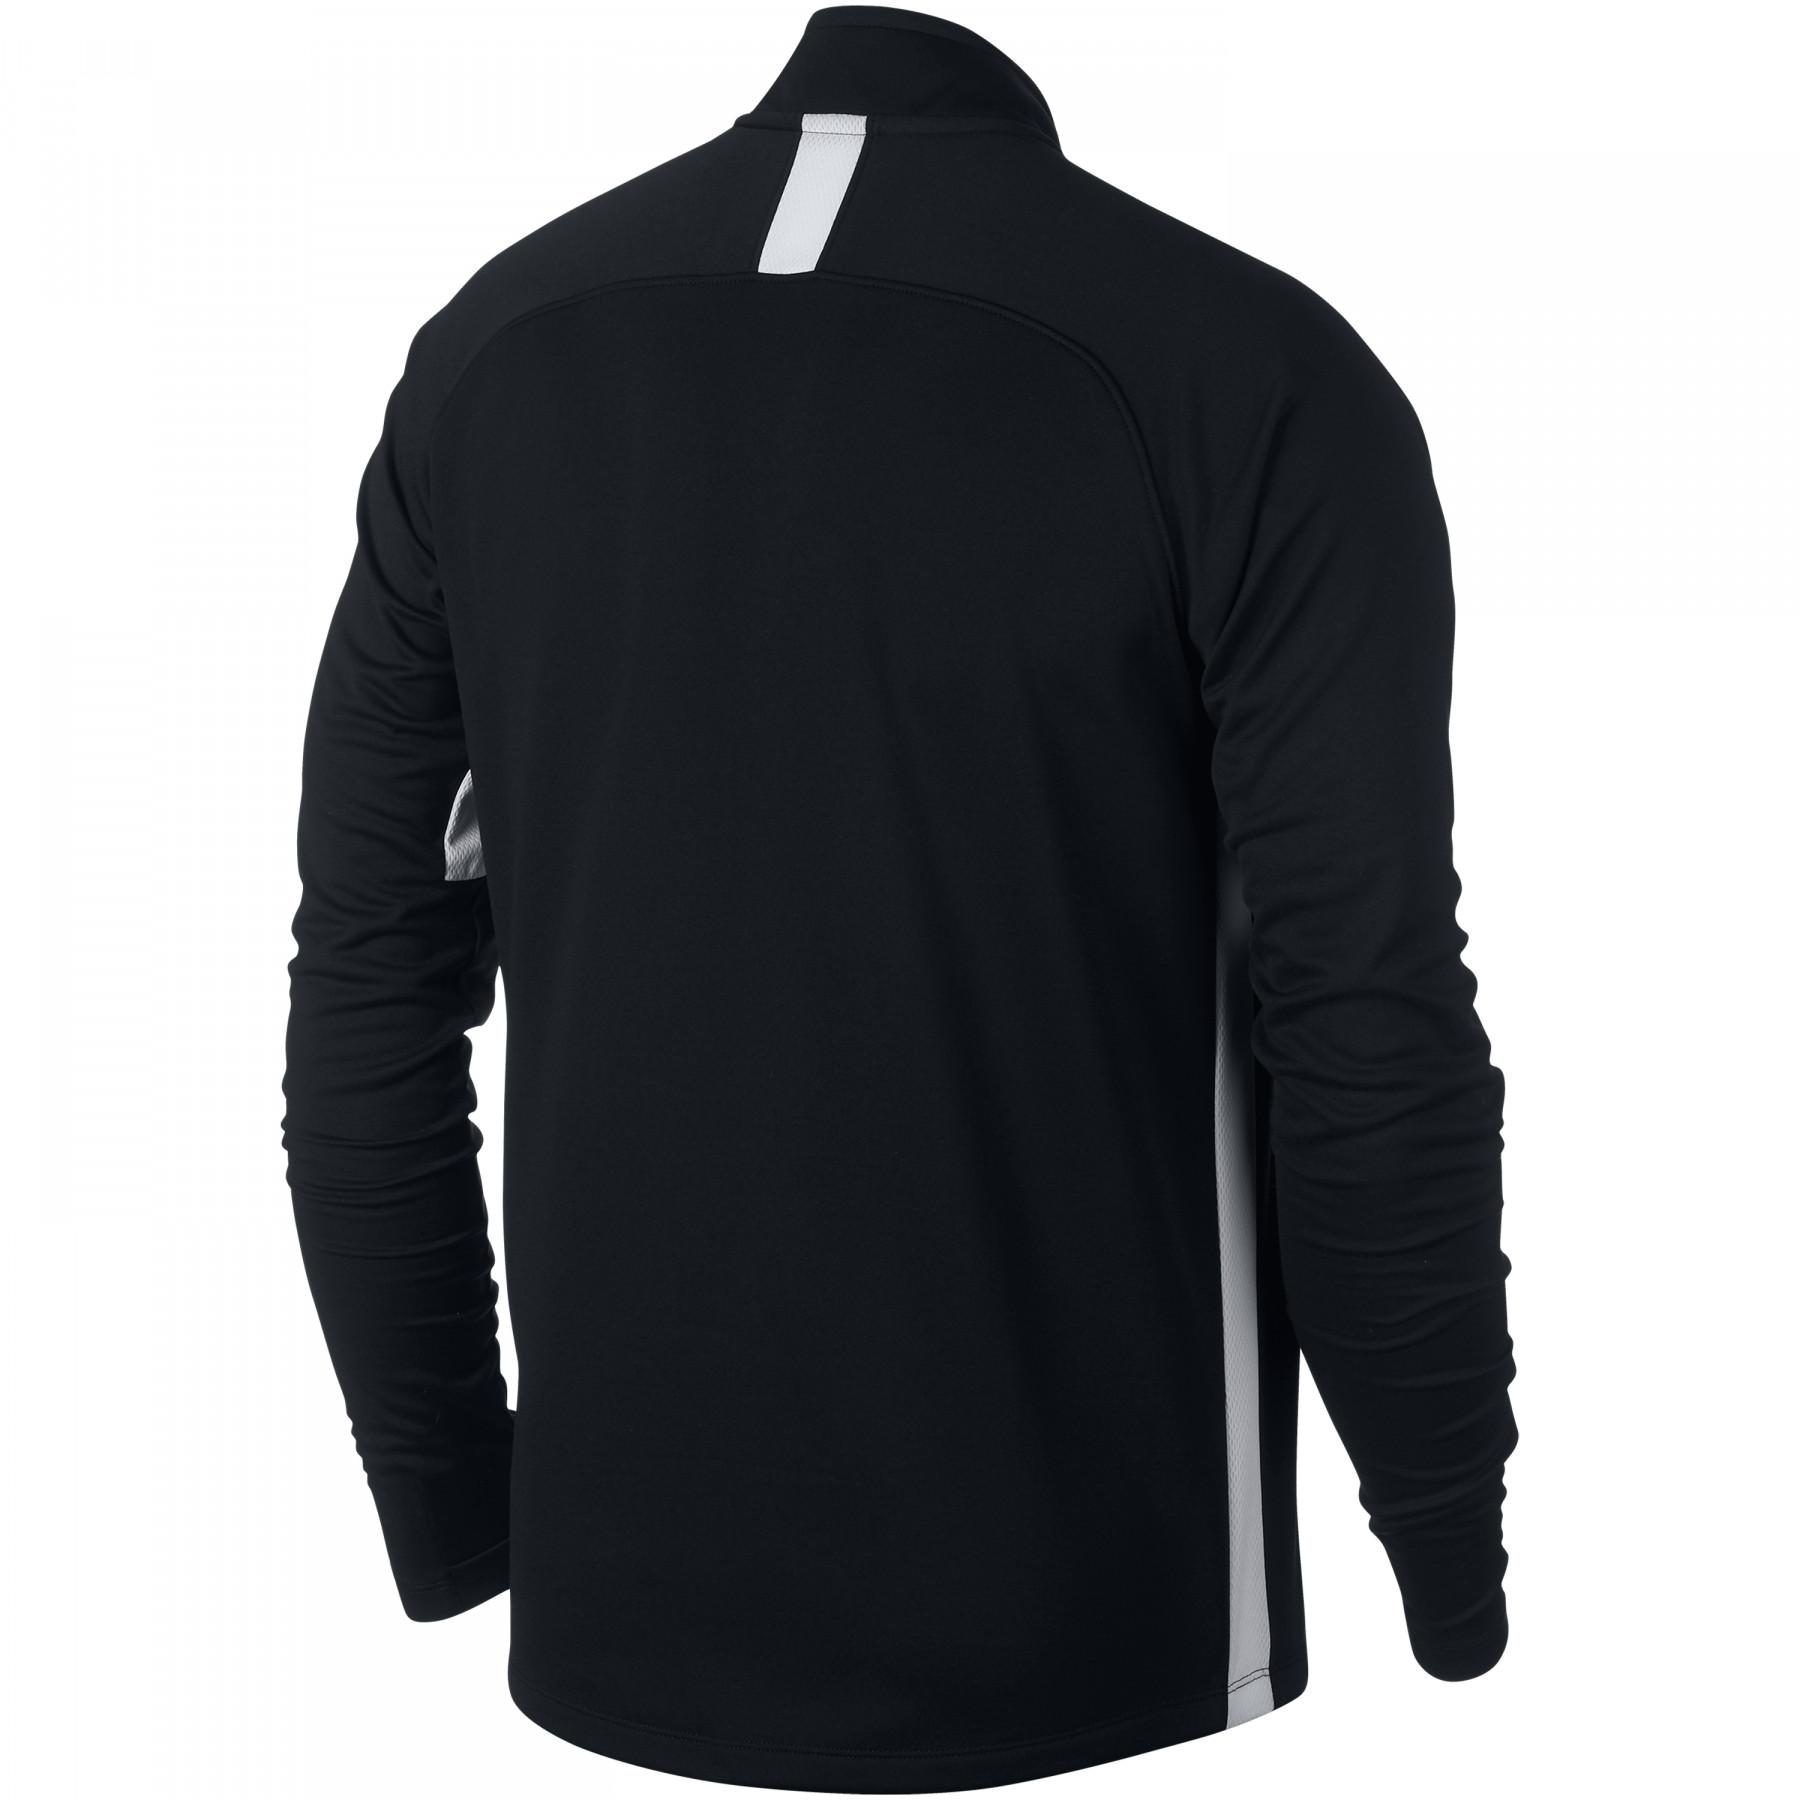 Maillot Nike dry Academy dril Top